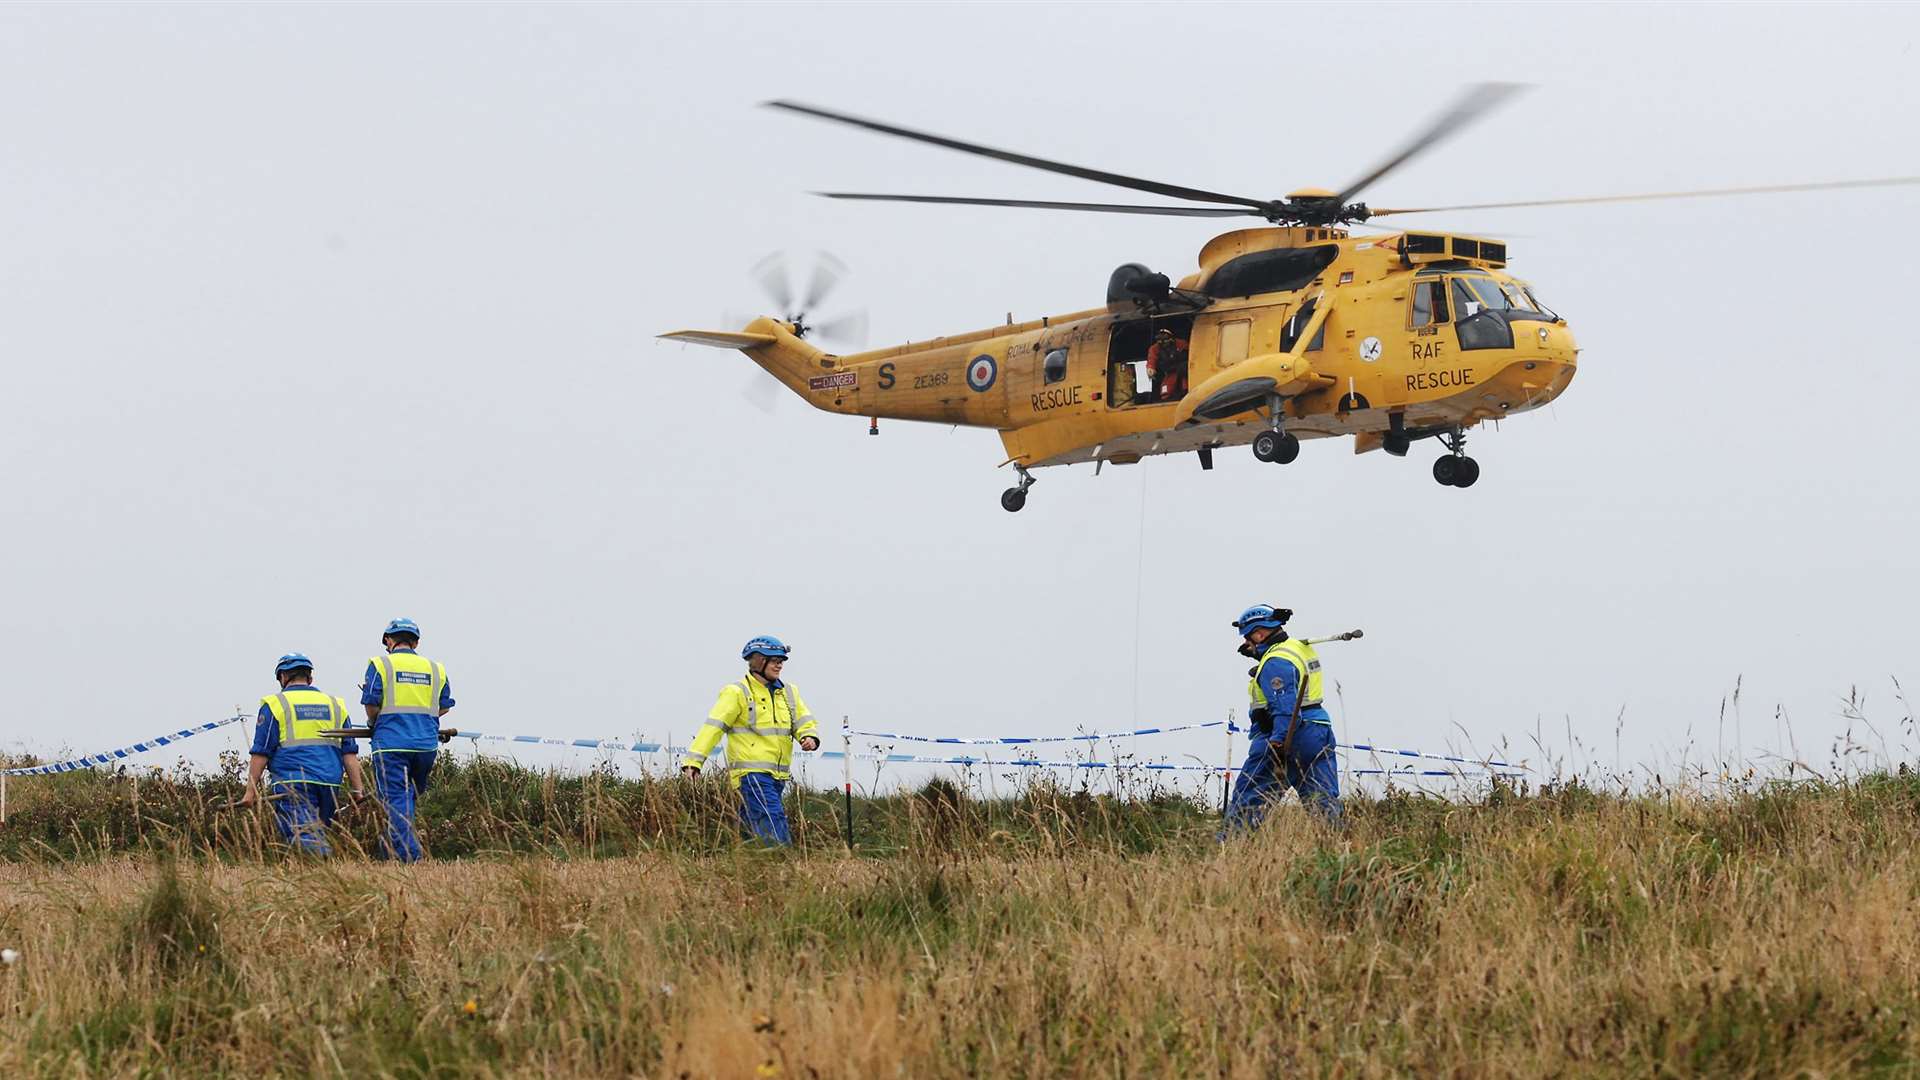 A helicopter takes off from the scene of the crash in Yorkshire. Picture: rossparry.co.uk/Steven Schofield